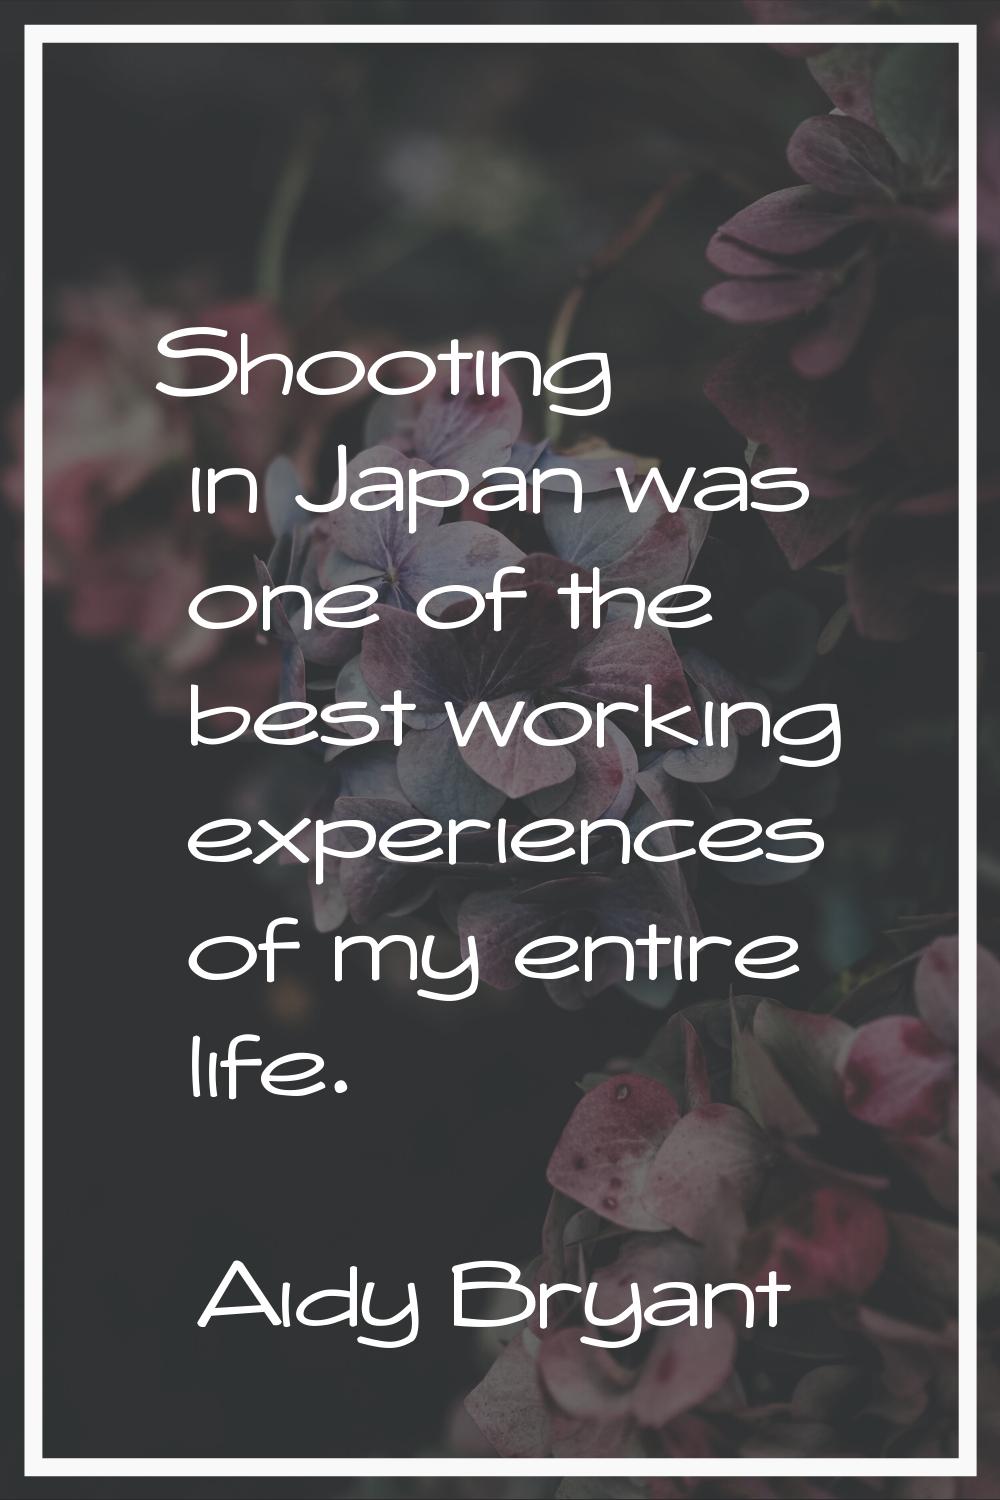 Shooting in Japan was one of the best working experiences of my entire life.